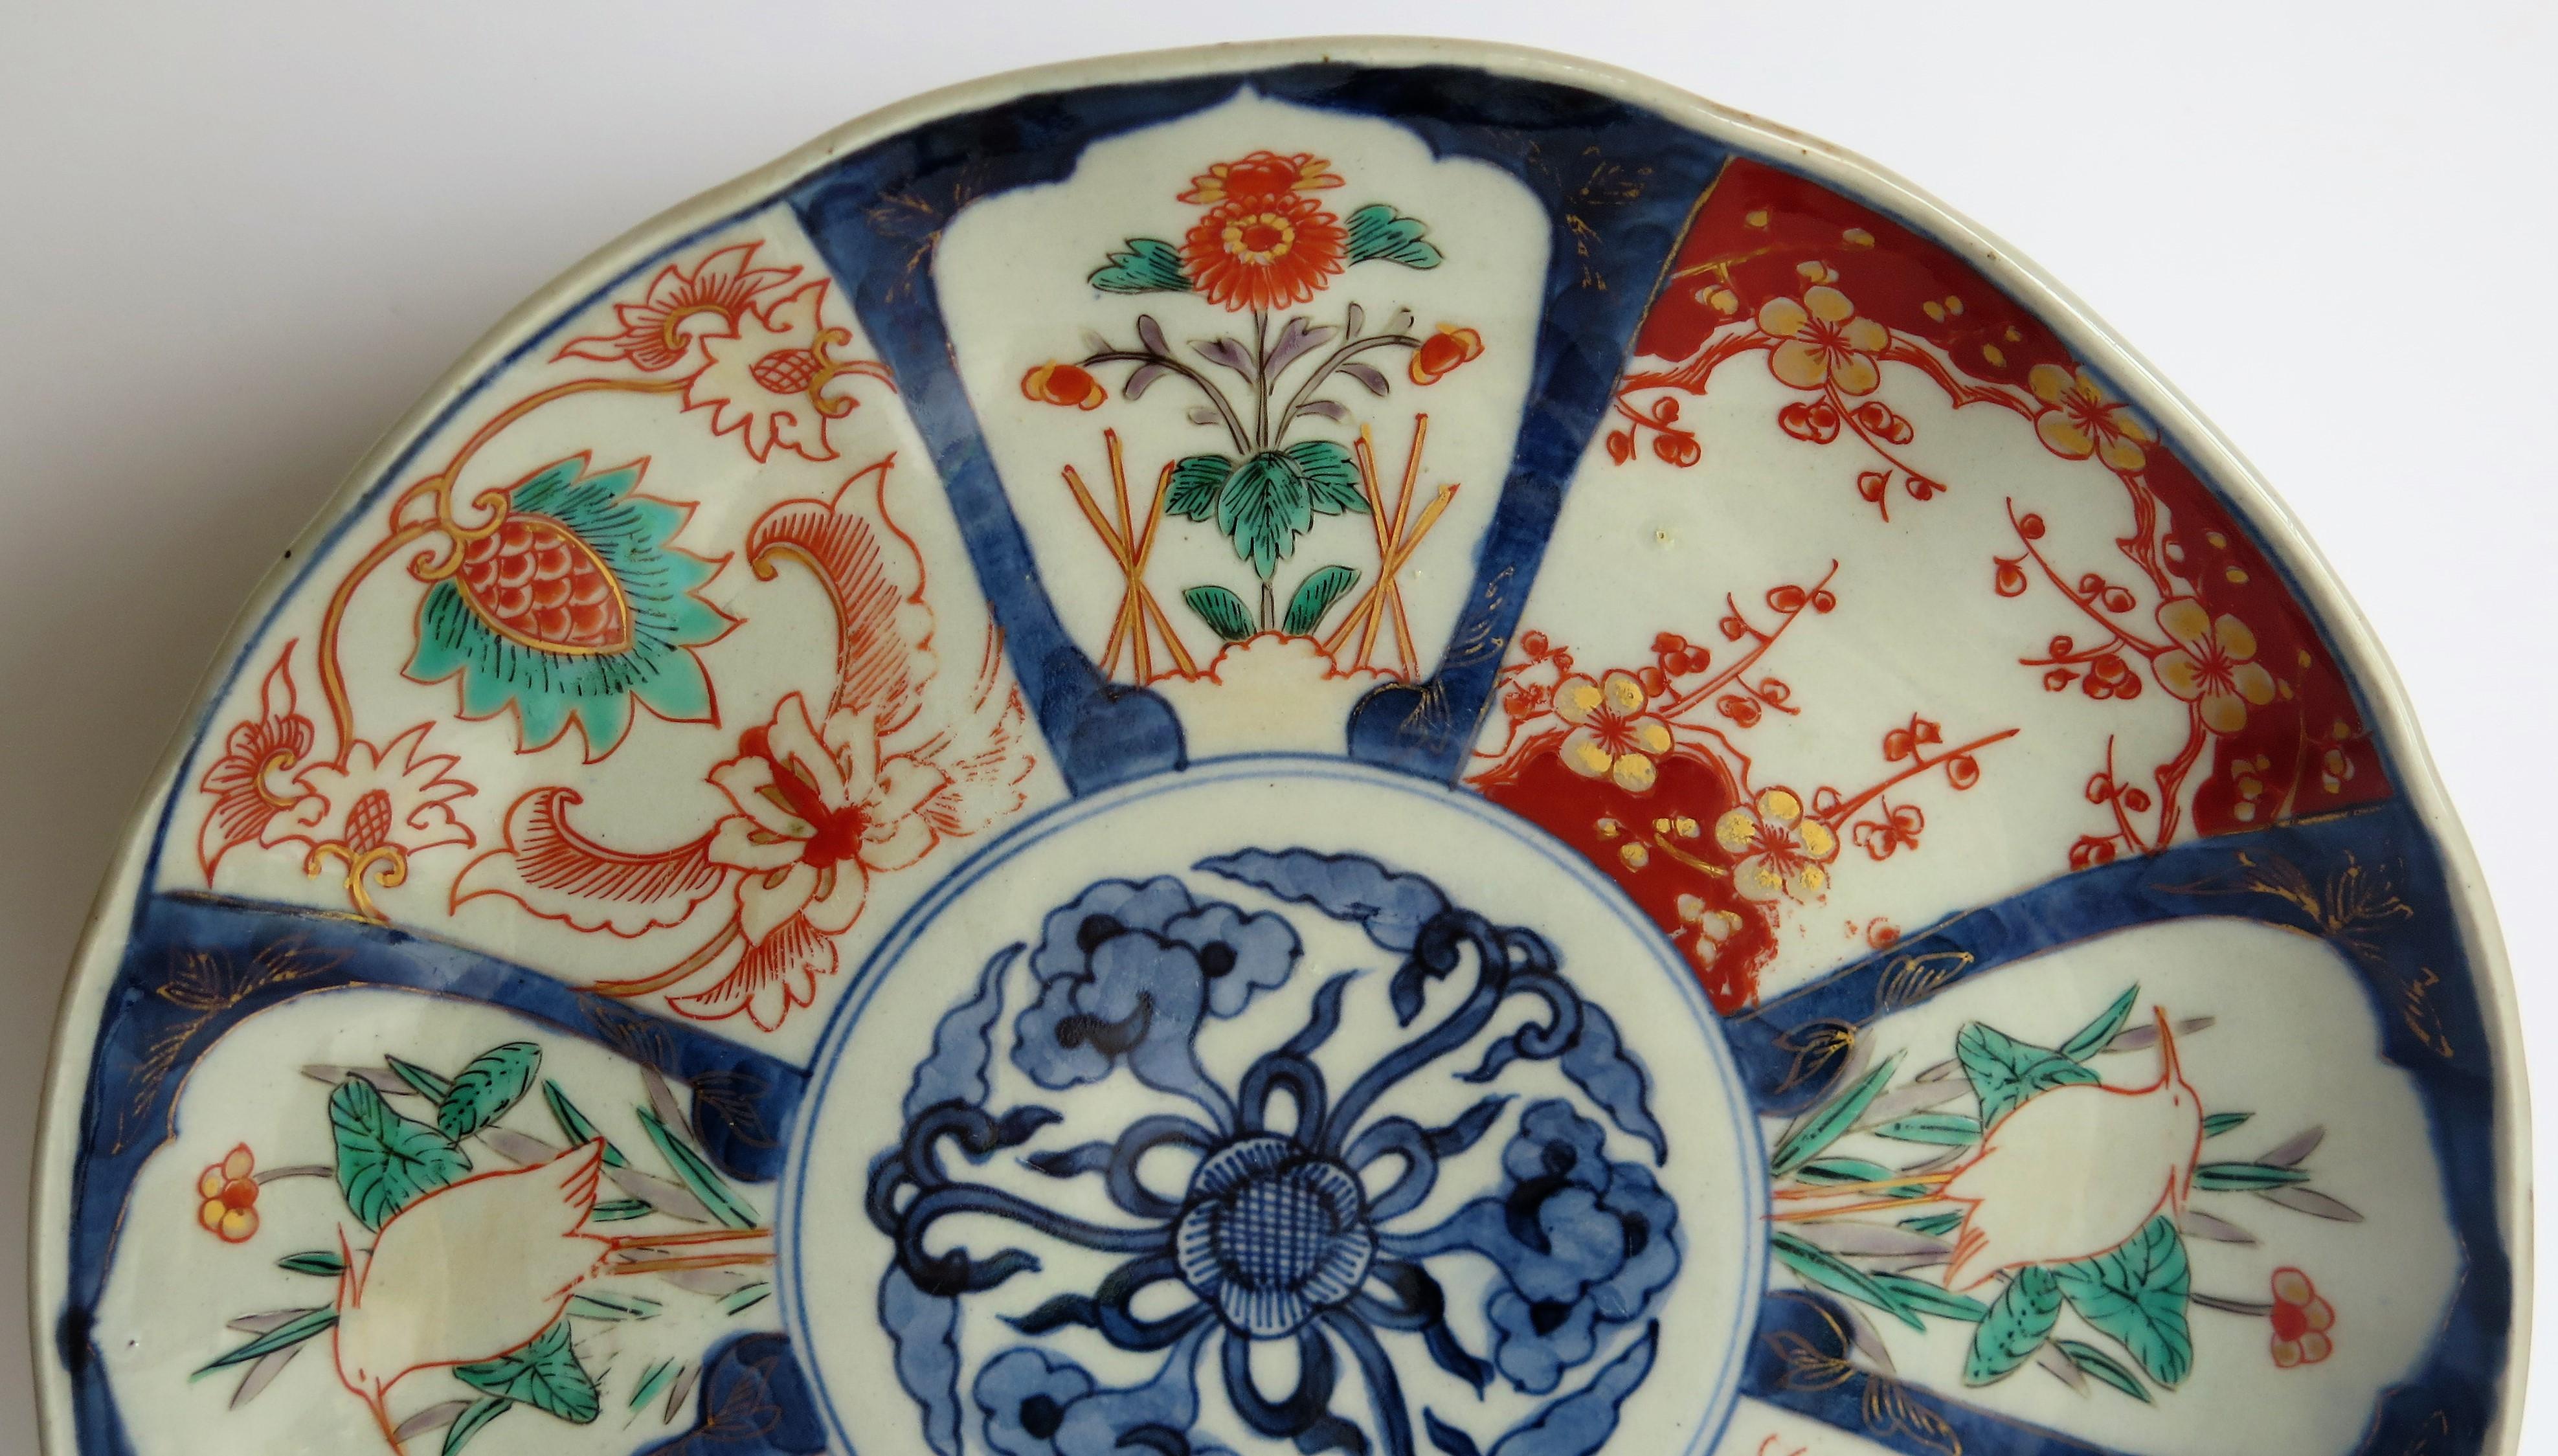 Japanese Porcelain Large Plate or Hand Painted Imari, 19th Century Meiji Period  6